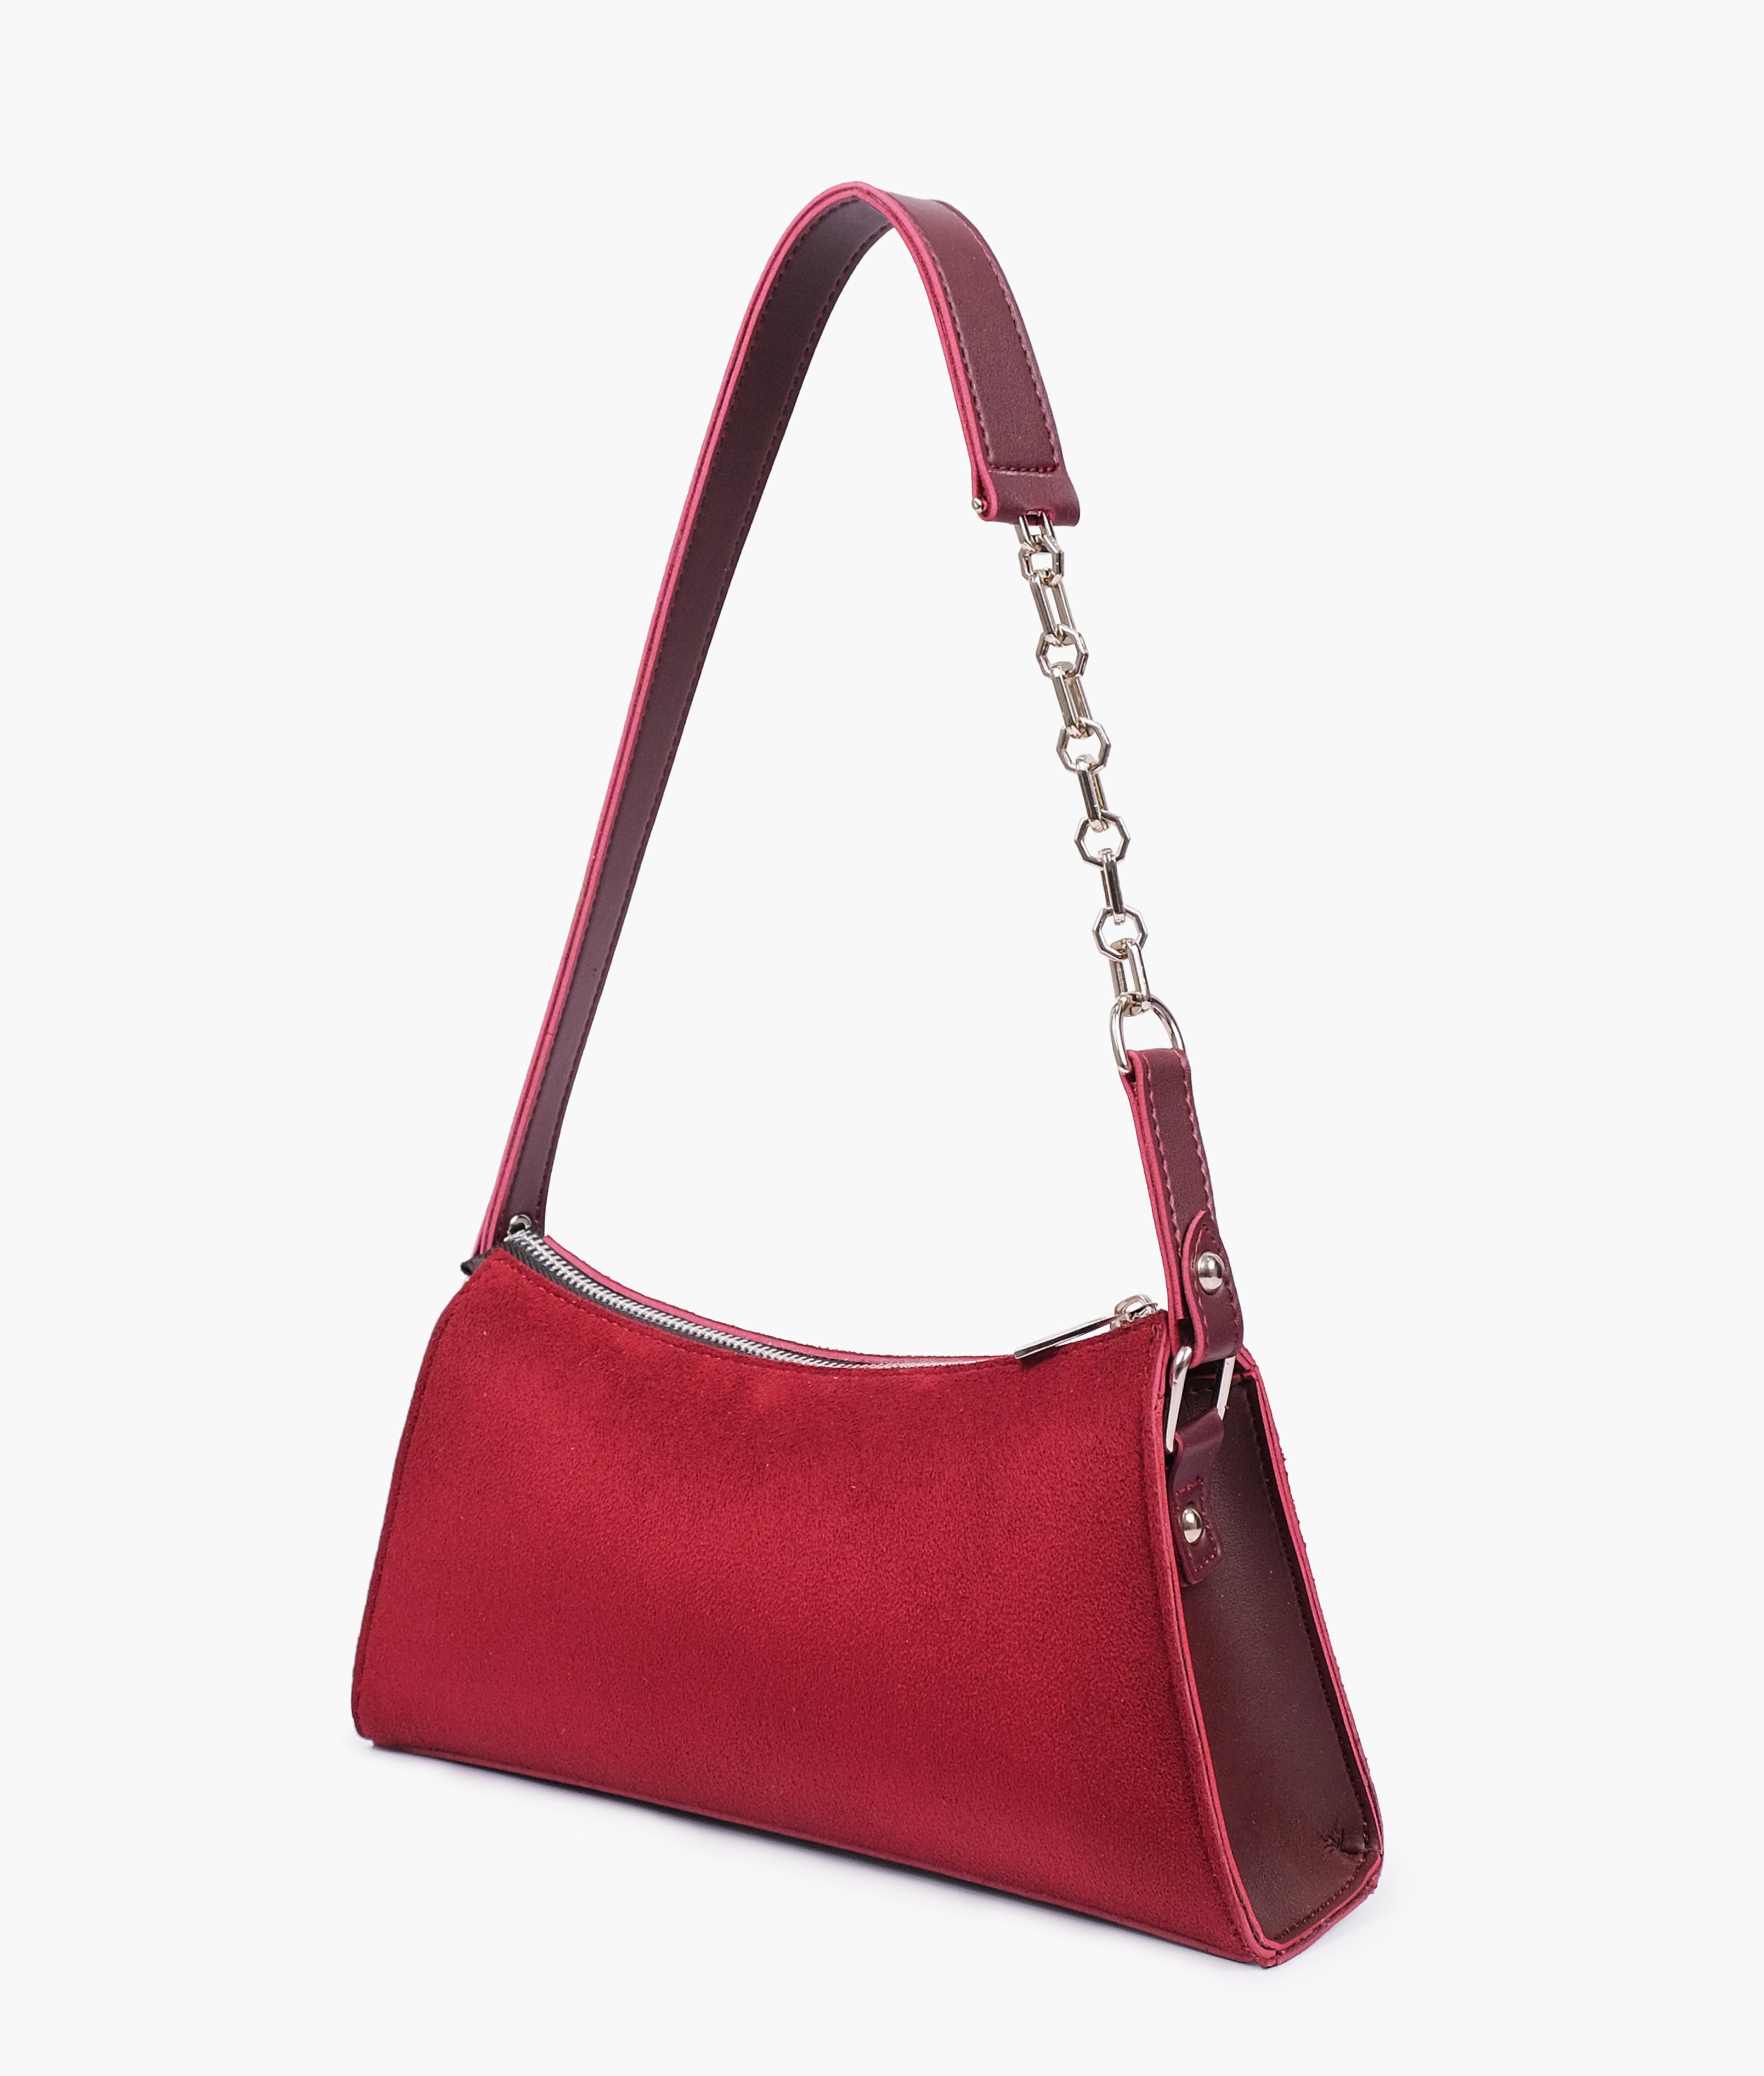 Burgundy suede evening bag with chain handle